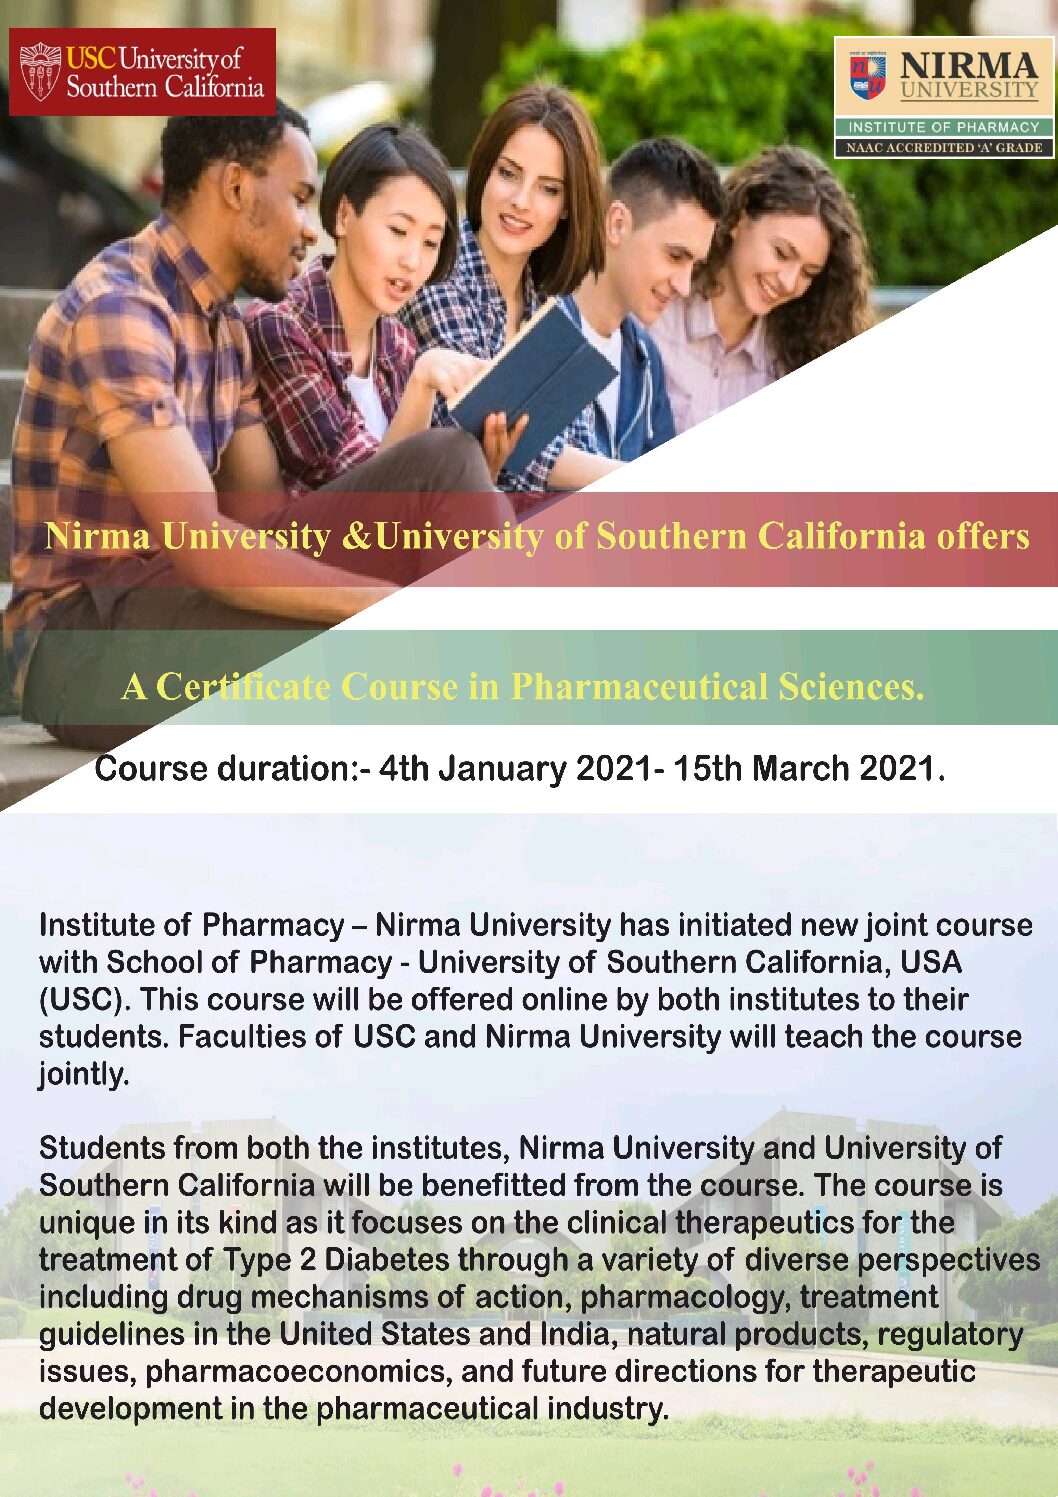 Institute of Pharmacy, Nirma University has initiated a new joint certificate course with School of Pharmacy, University of Southern California (USC), USA.